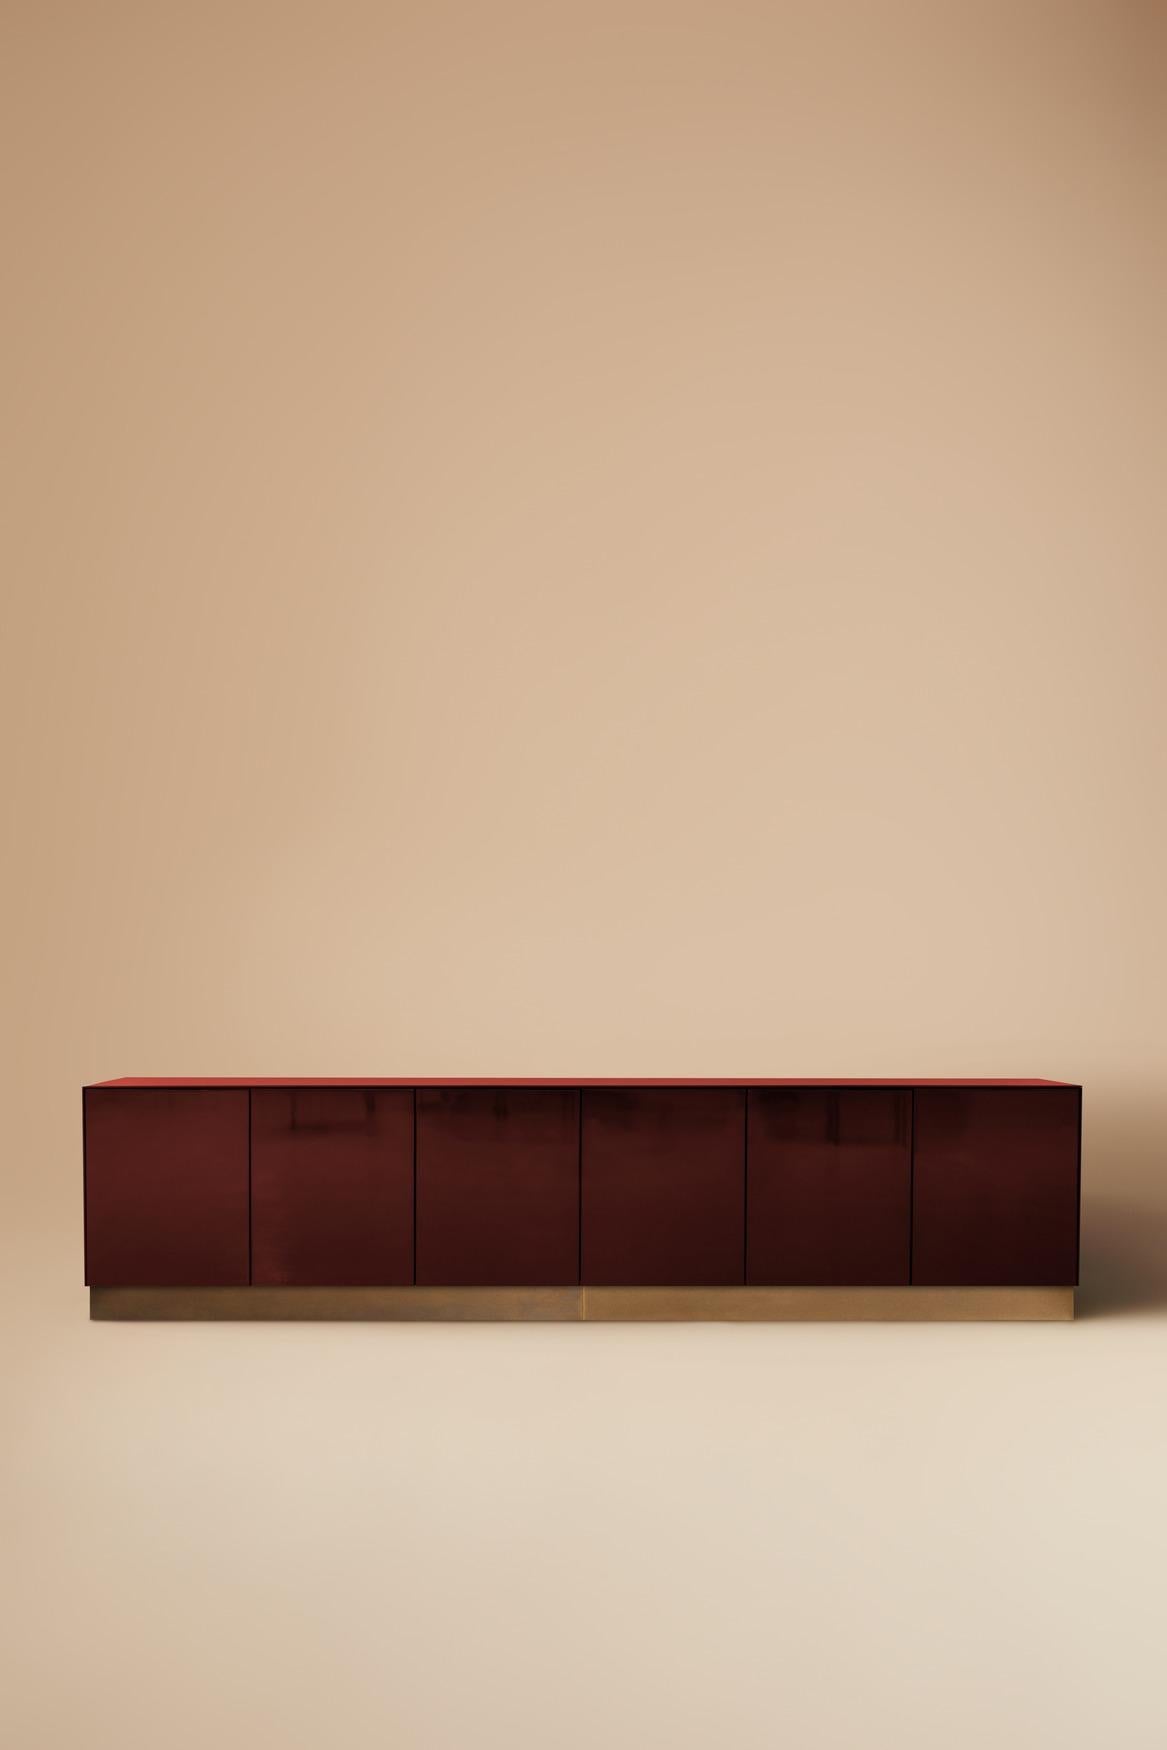 Minimalist Promenade Low Unit Handcrafted in Oxblood High Gloss Steel with Oxidised Brass